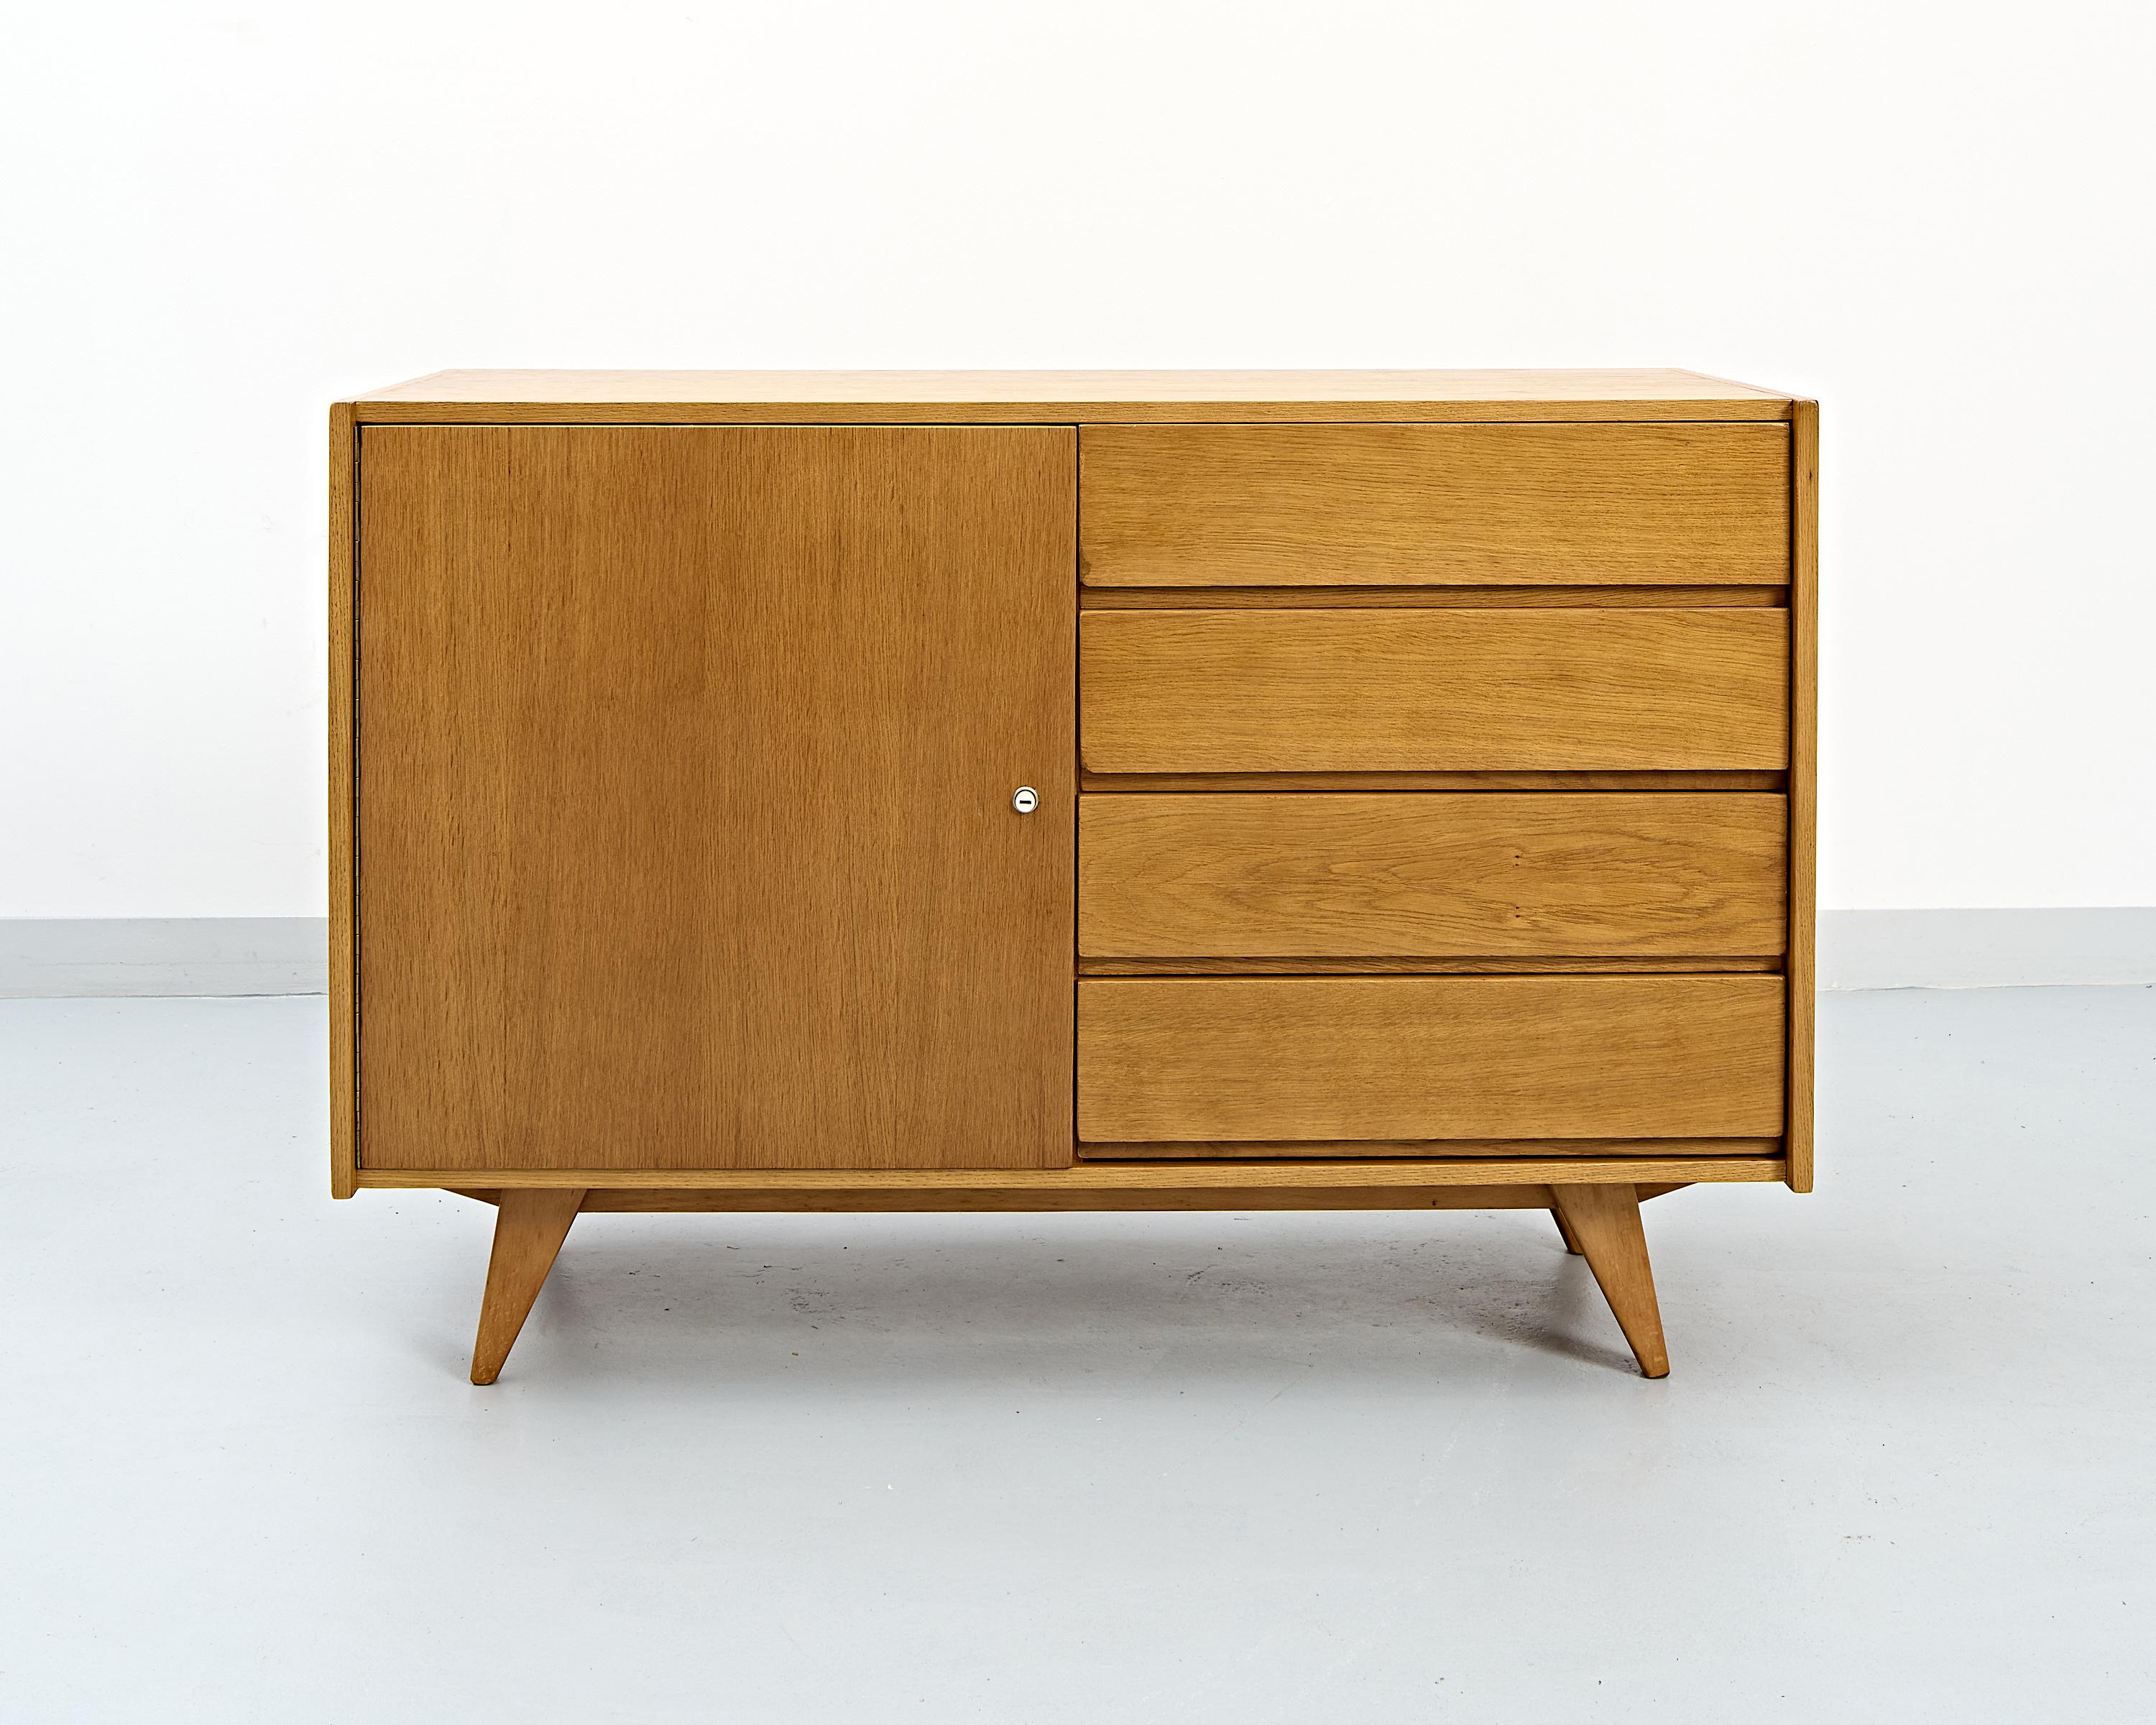 The U-458 sideboard designed by the czech designer Jiří Jiroutek as a part of the U series. Works began after the enormous success of the czech pavilion at the Brussels ’58 expo and the series became one of the leading examples of the newly formed